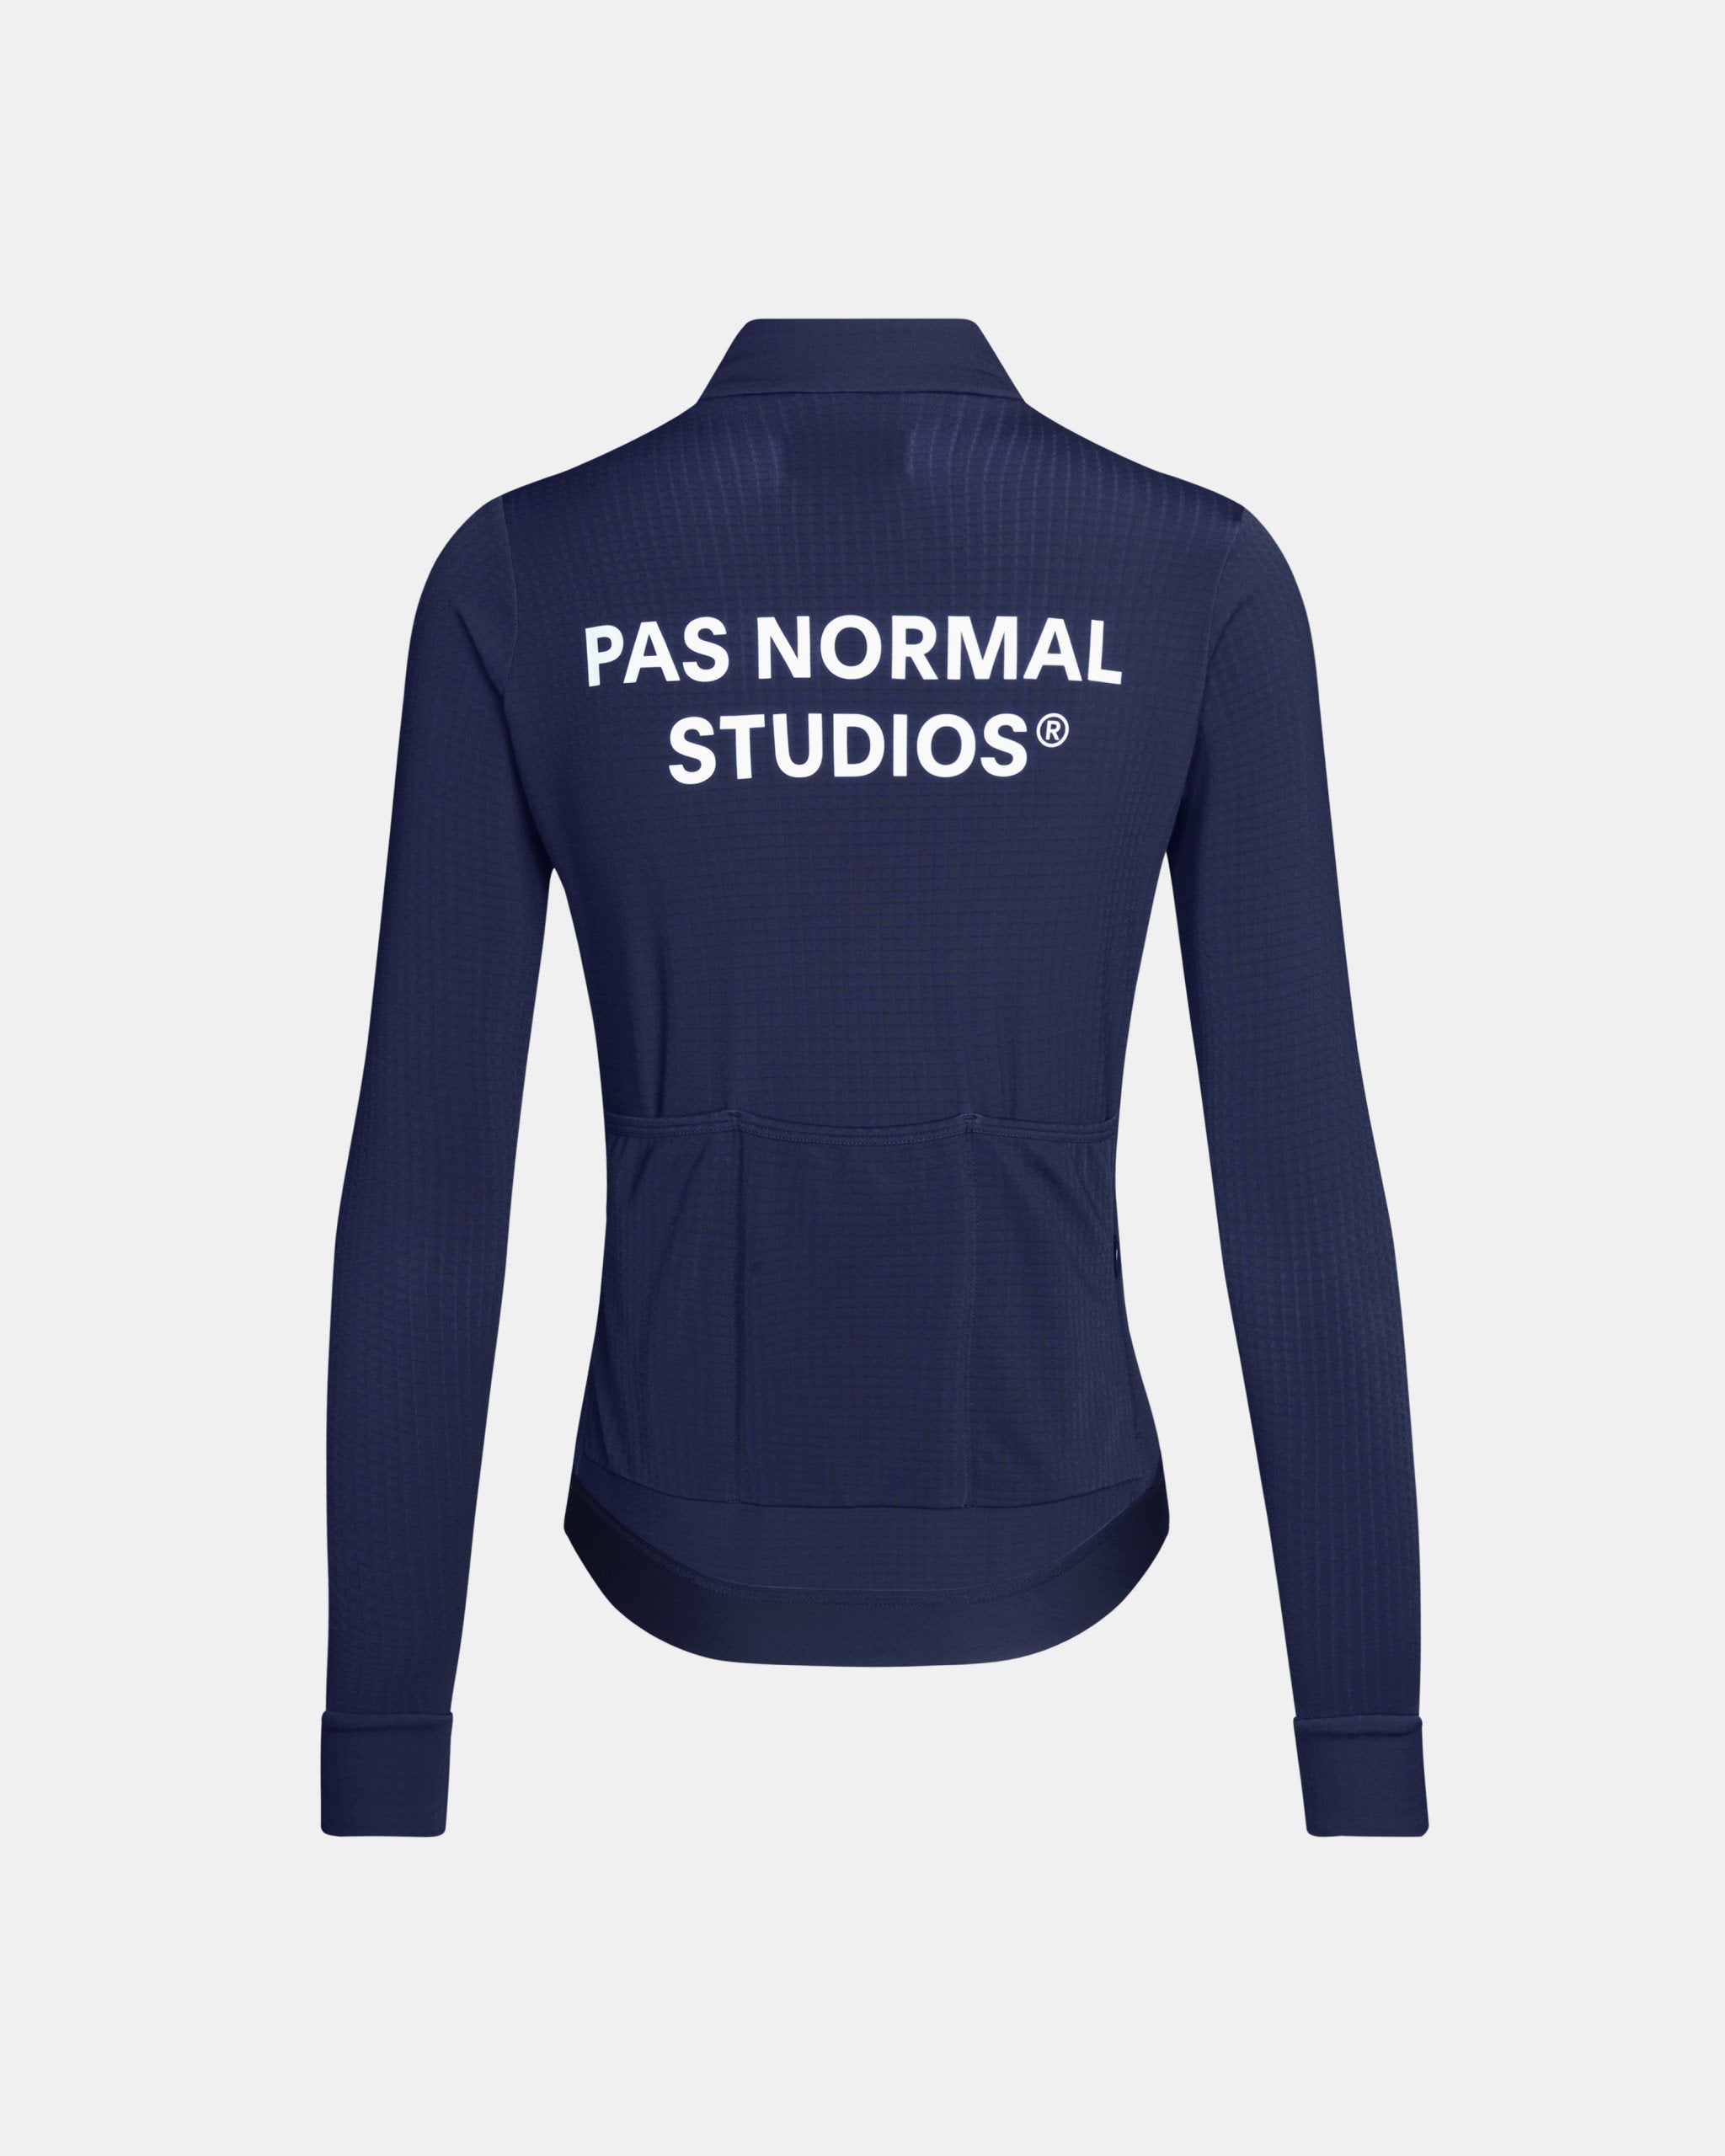 Pas Normal Studios W's Essential Long Sleeve Jersey